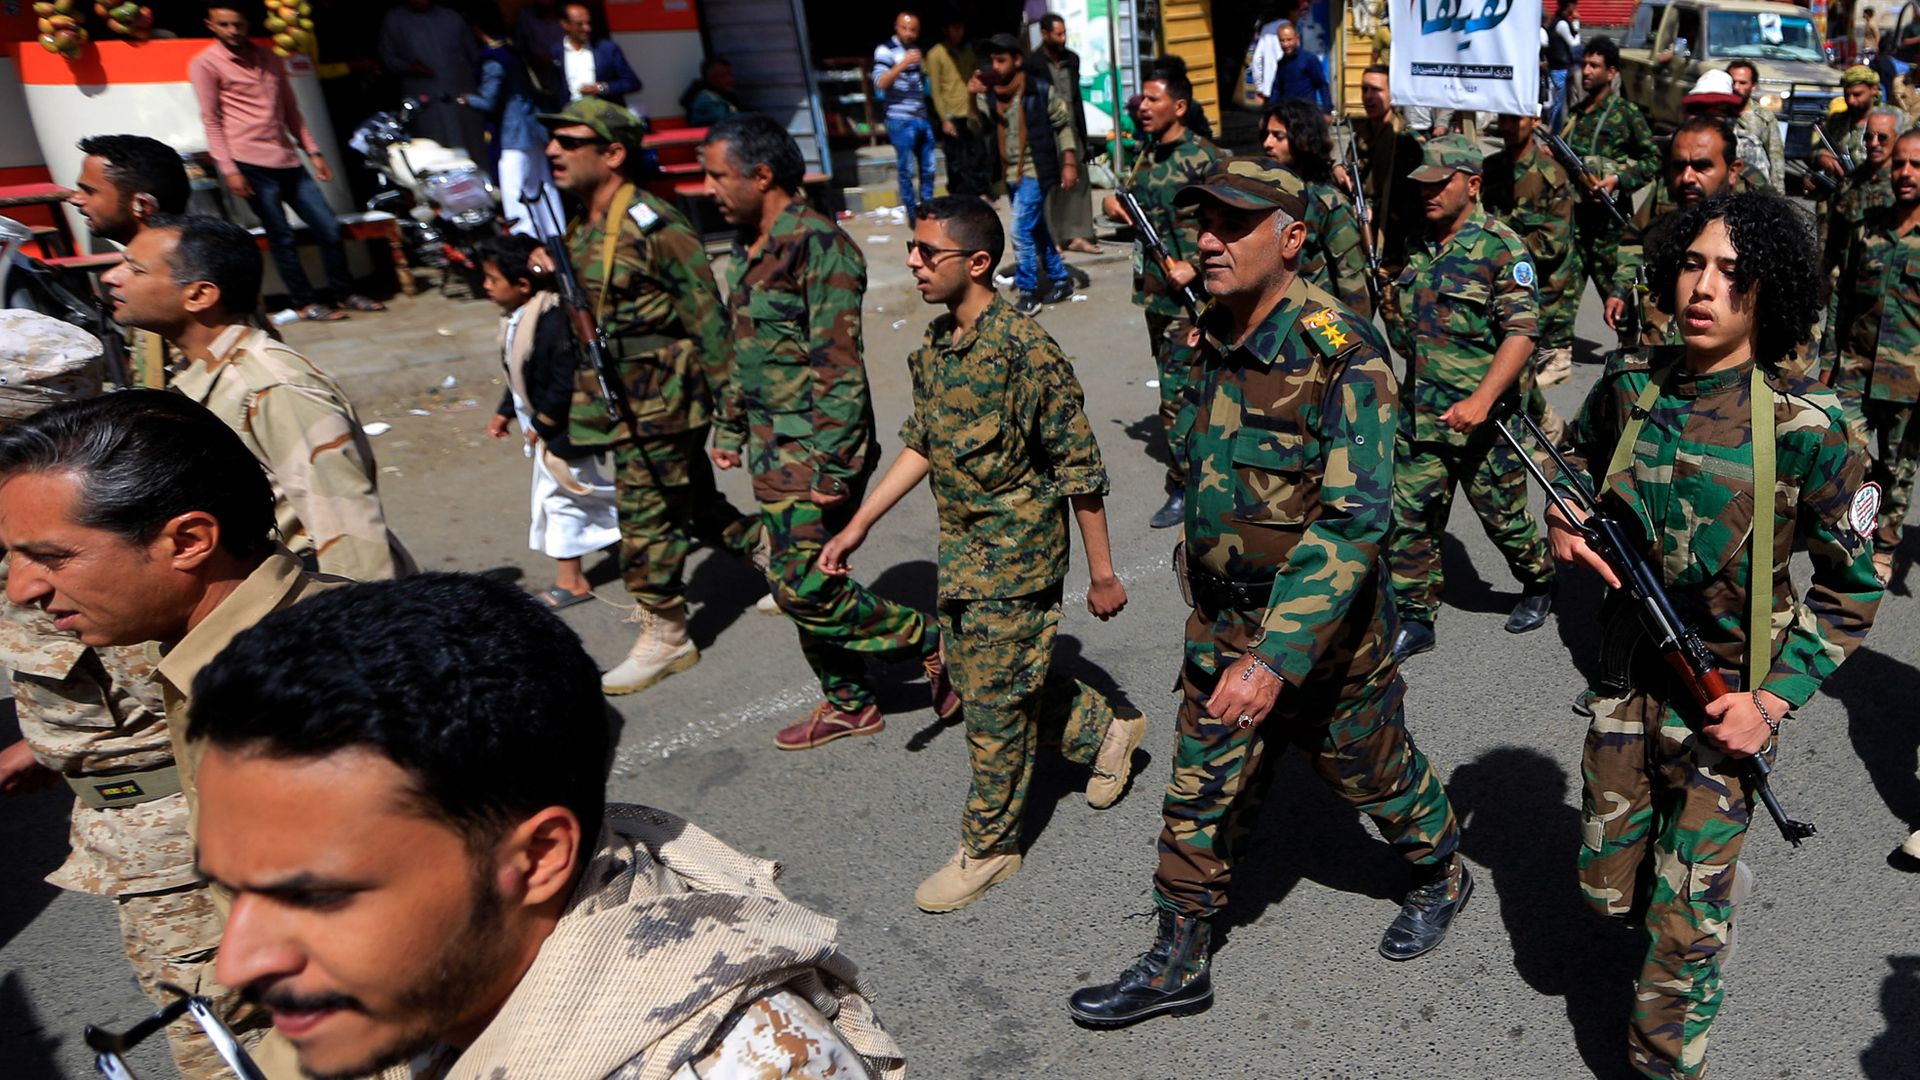 Forces loyal to Yemen's Houthi rebels march in a military parade in Saana.